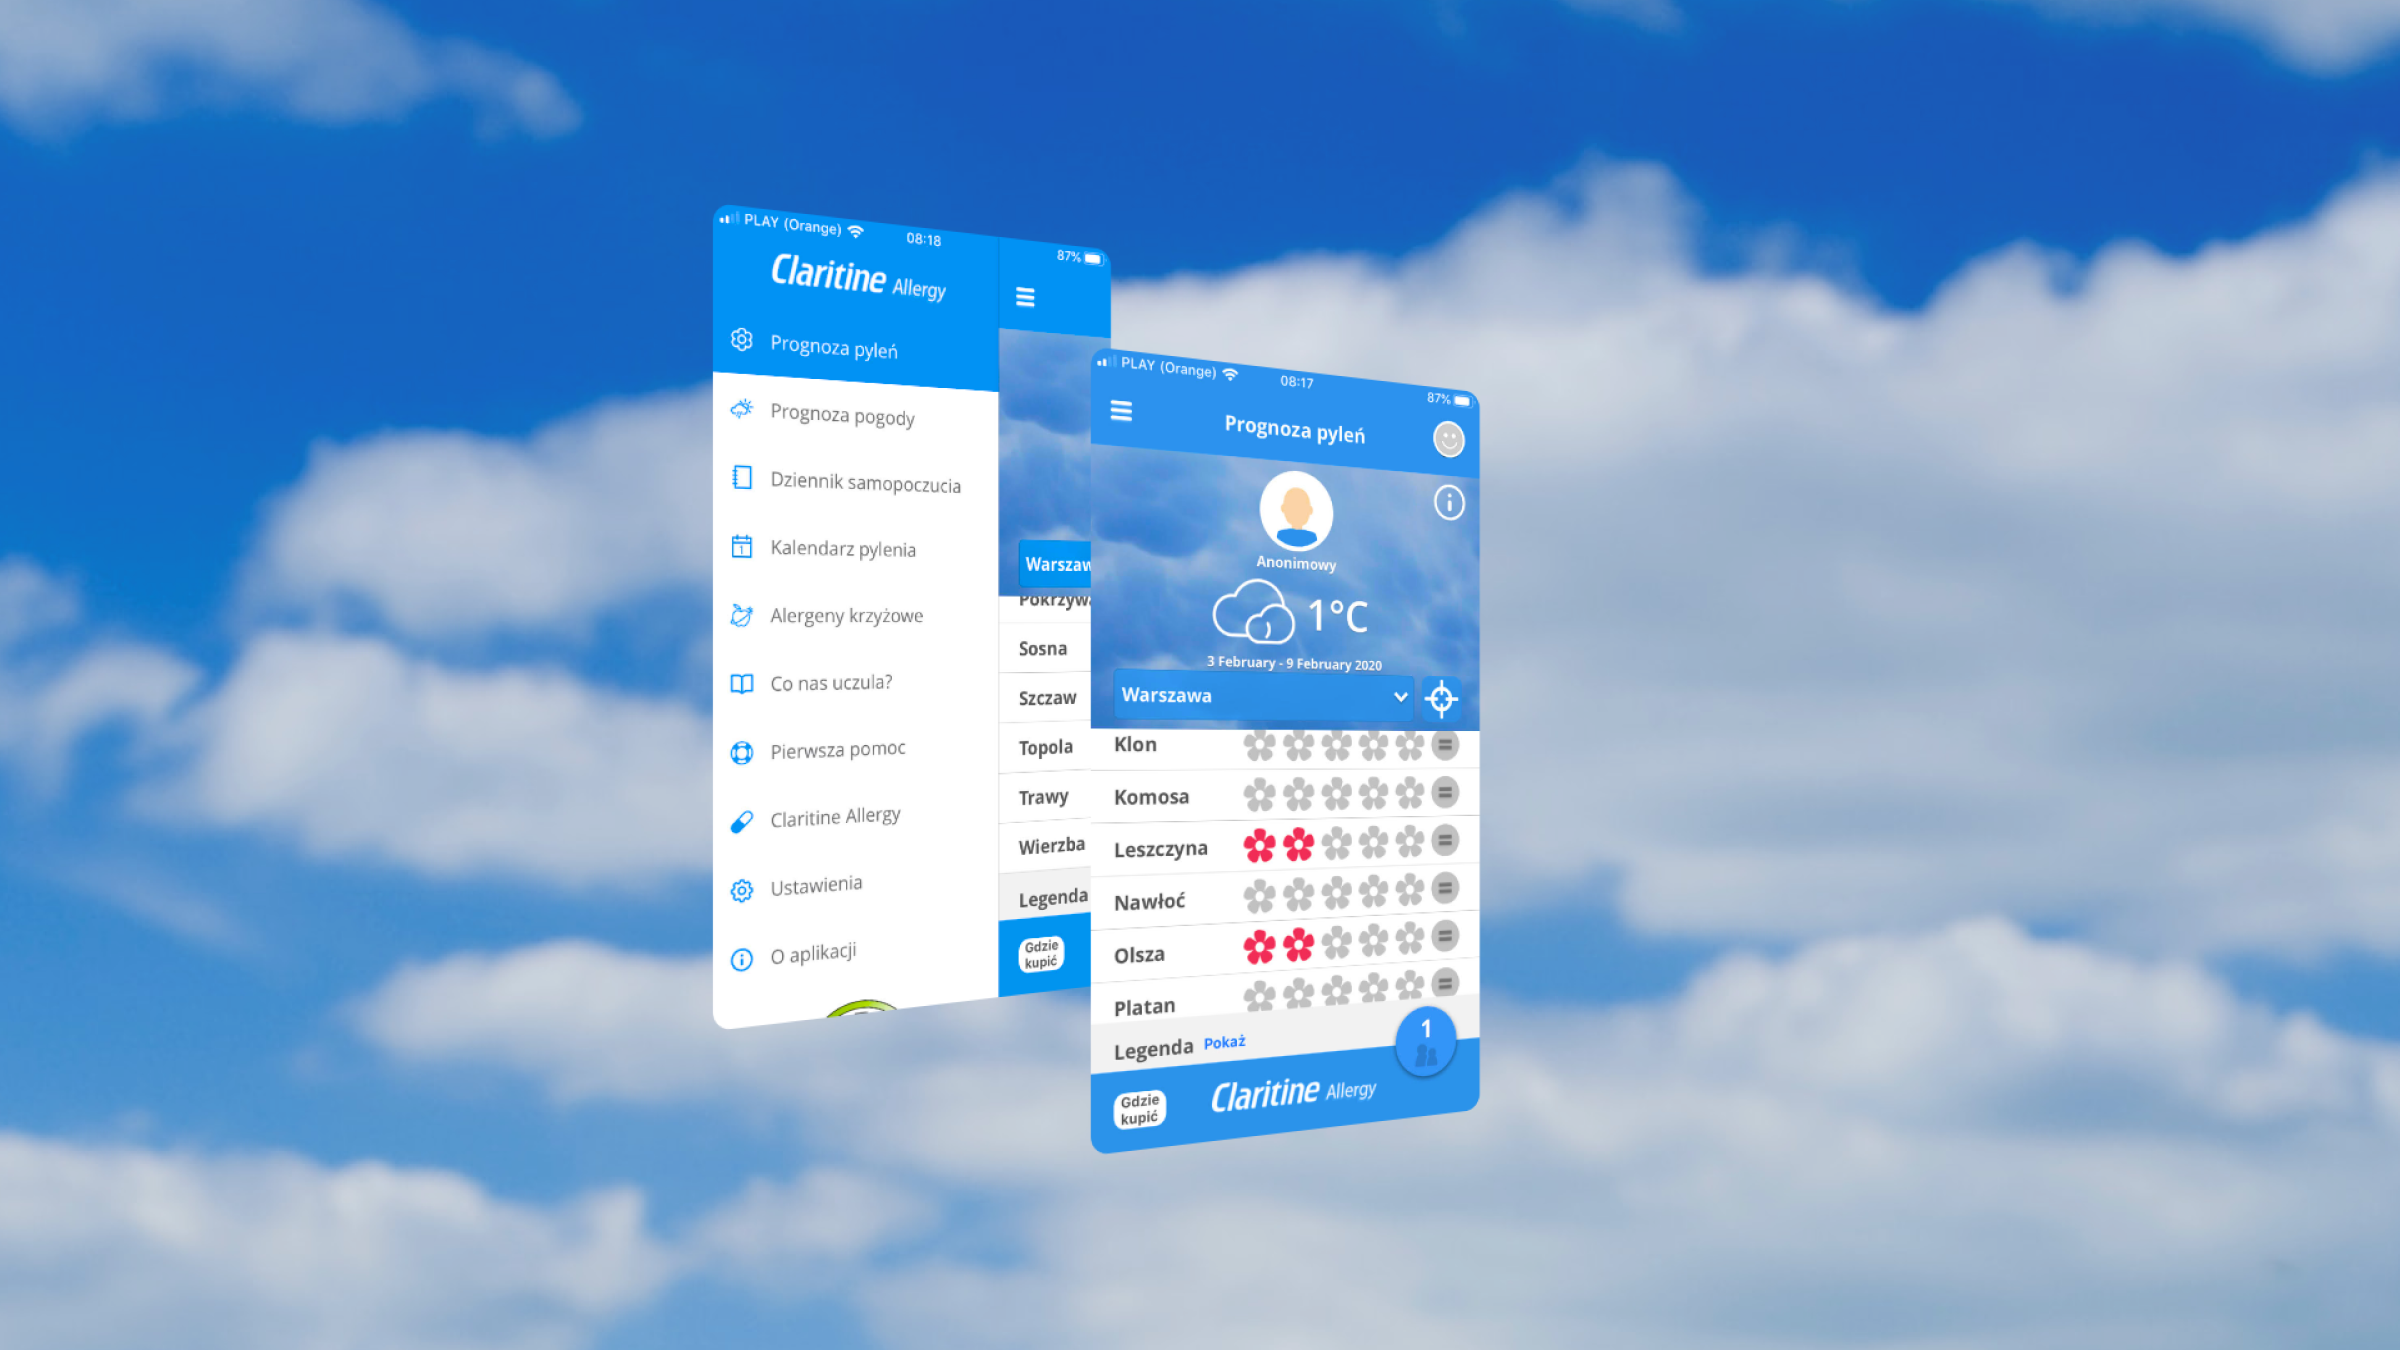 Two levitating screens of the claritine application in the summer sky, one screen shows the application menu, including pollen calendar and first aid, the second screen shows the strength of various allergens for the selected location, the design is kept in white and blue colors